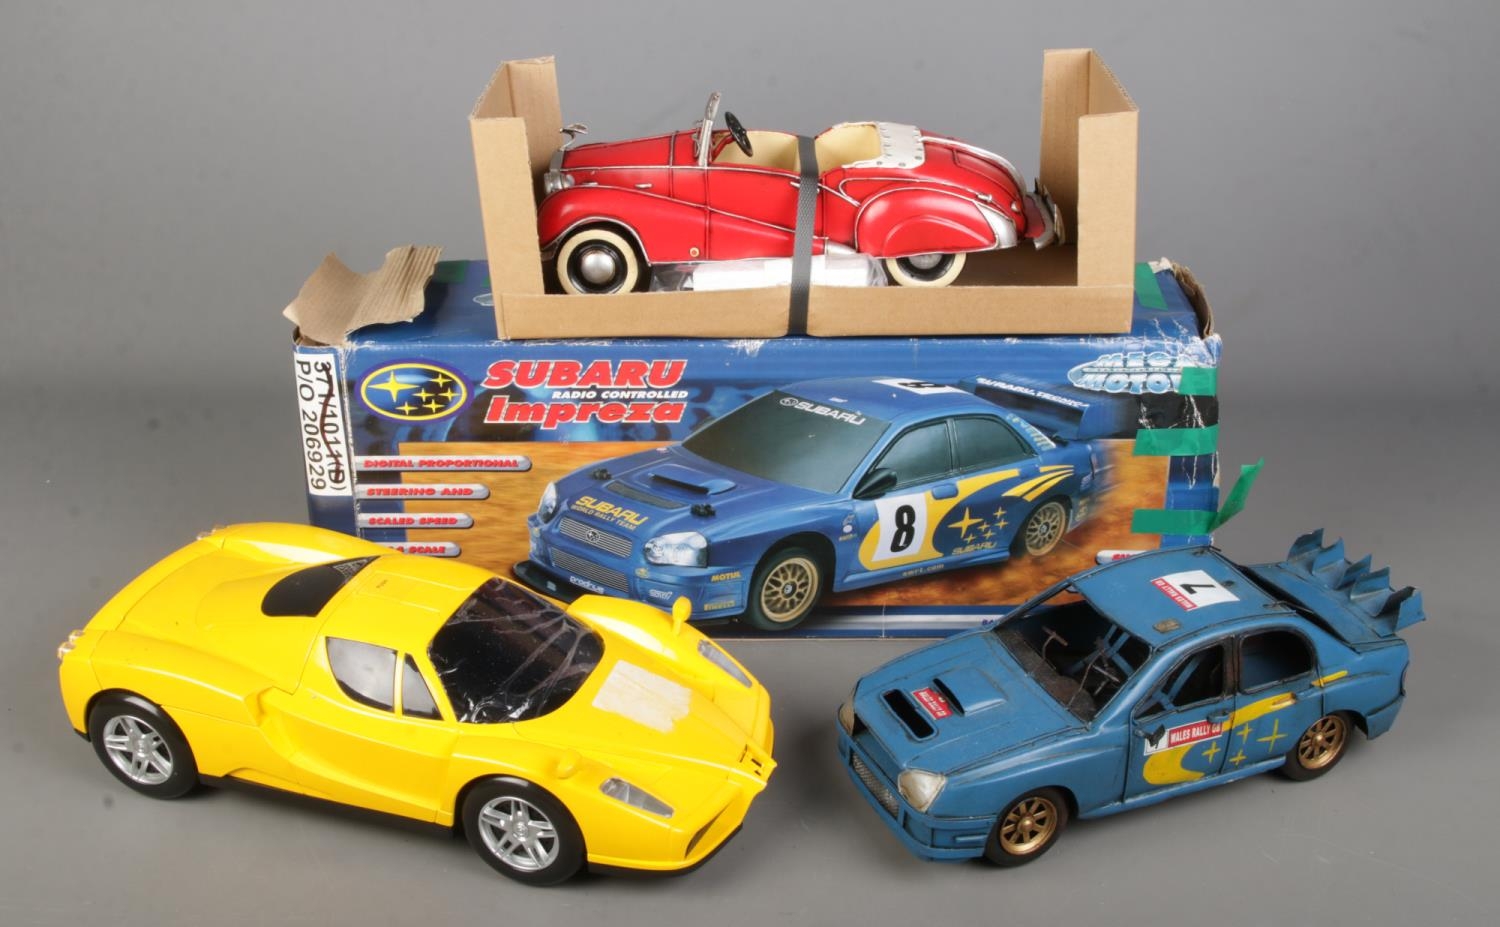 A collection of vintage cars including a Ferrari shaped cd player, remote control Subaru Impreza and